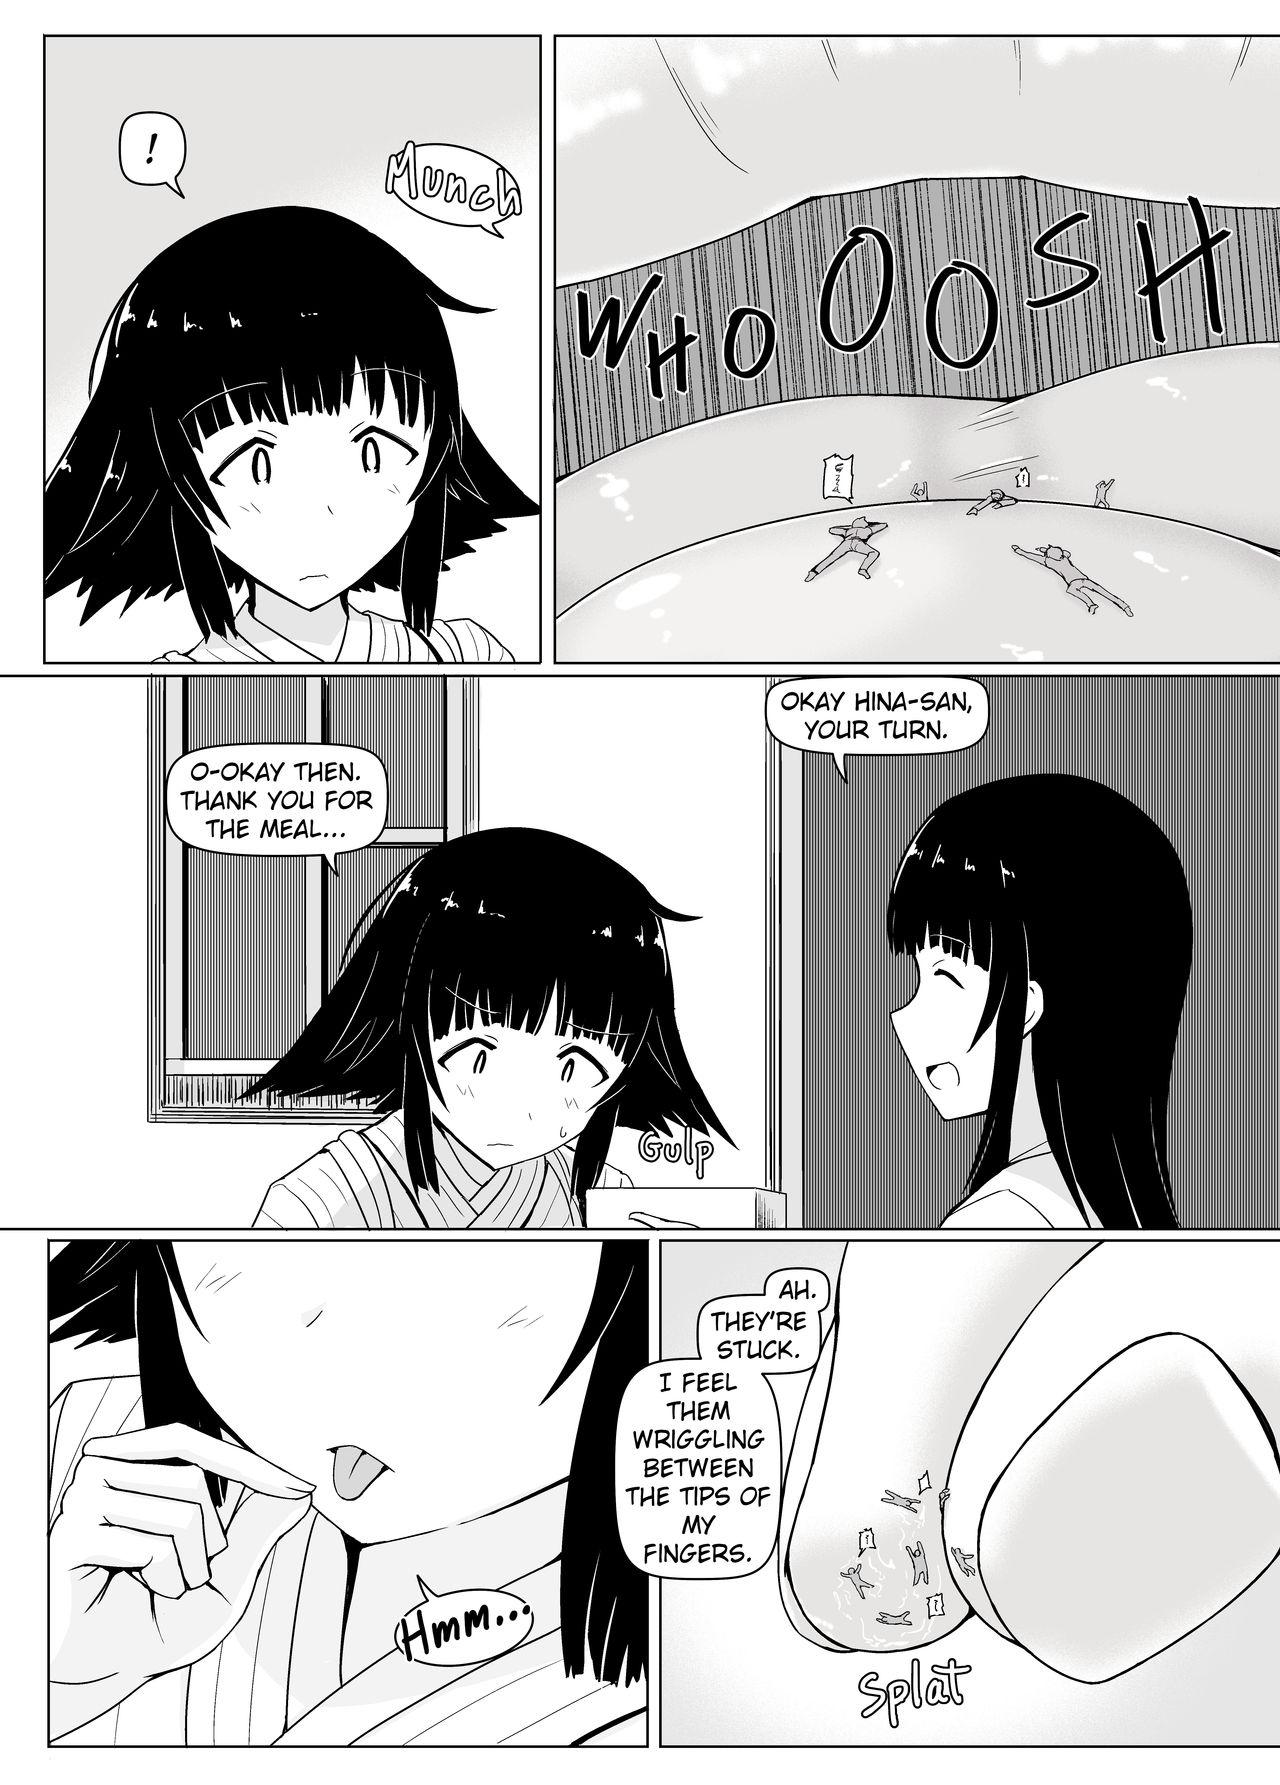 Stepsiblings Eating Ghost - Flying witch Tinytits - Page 8